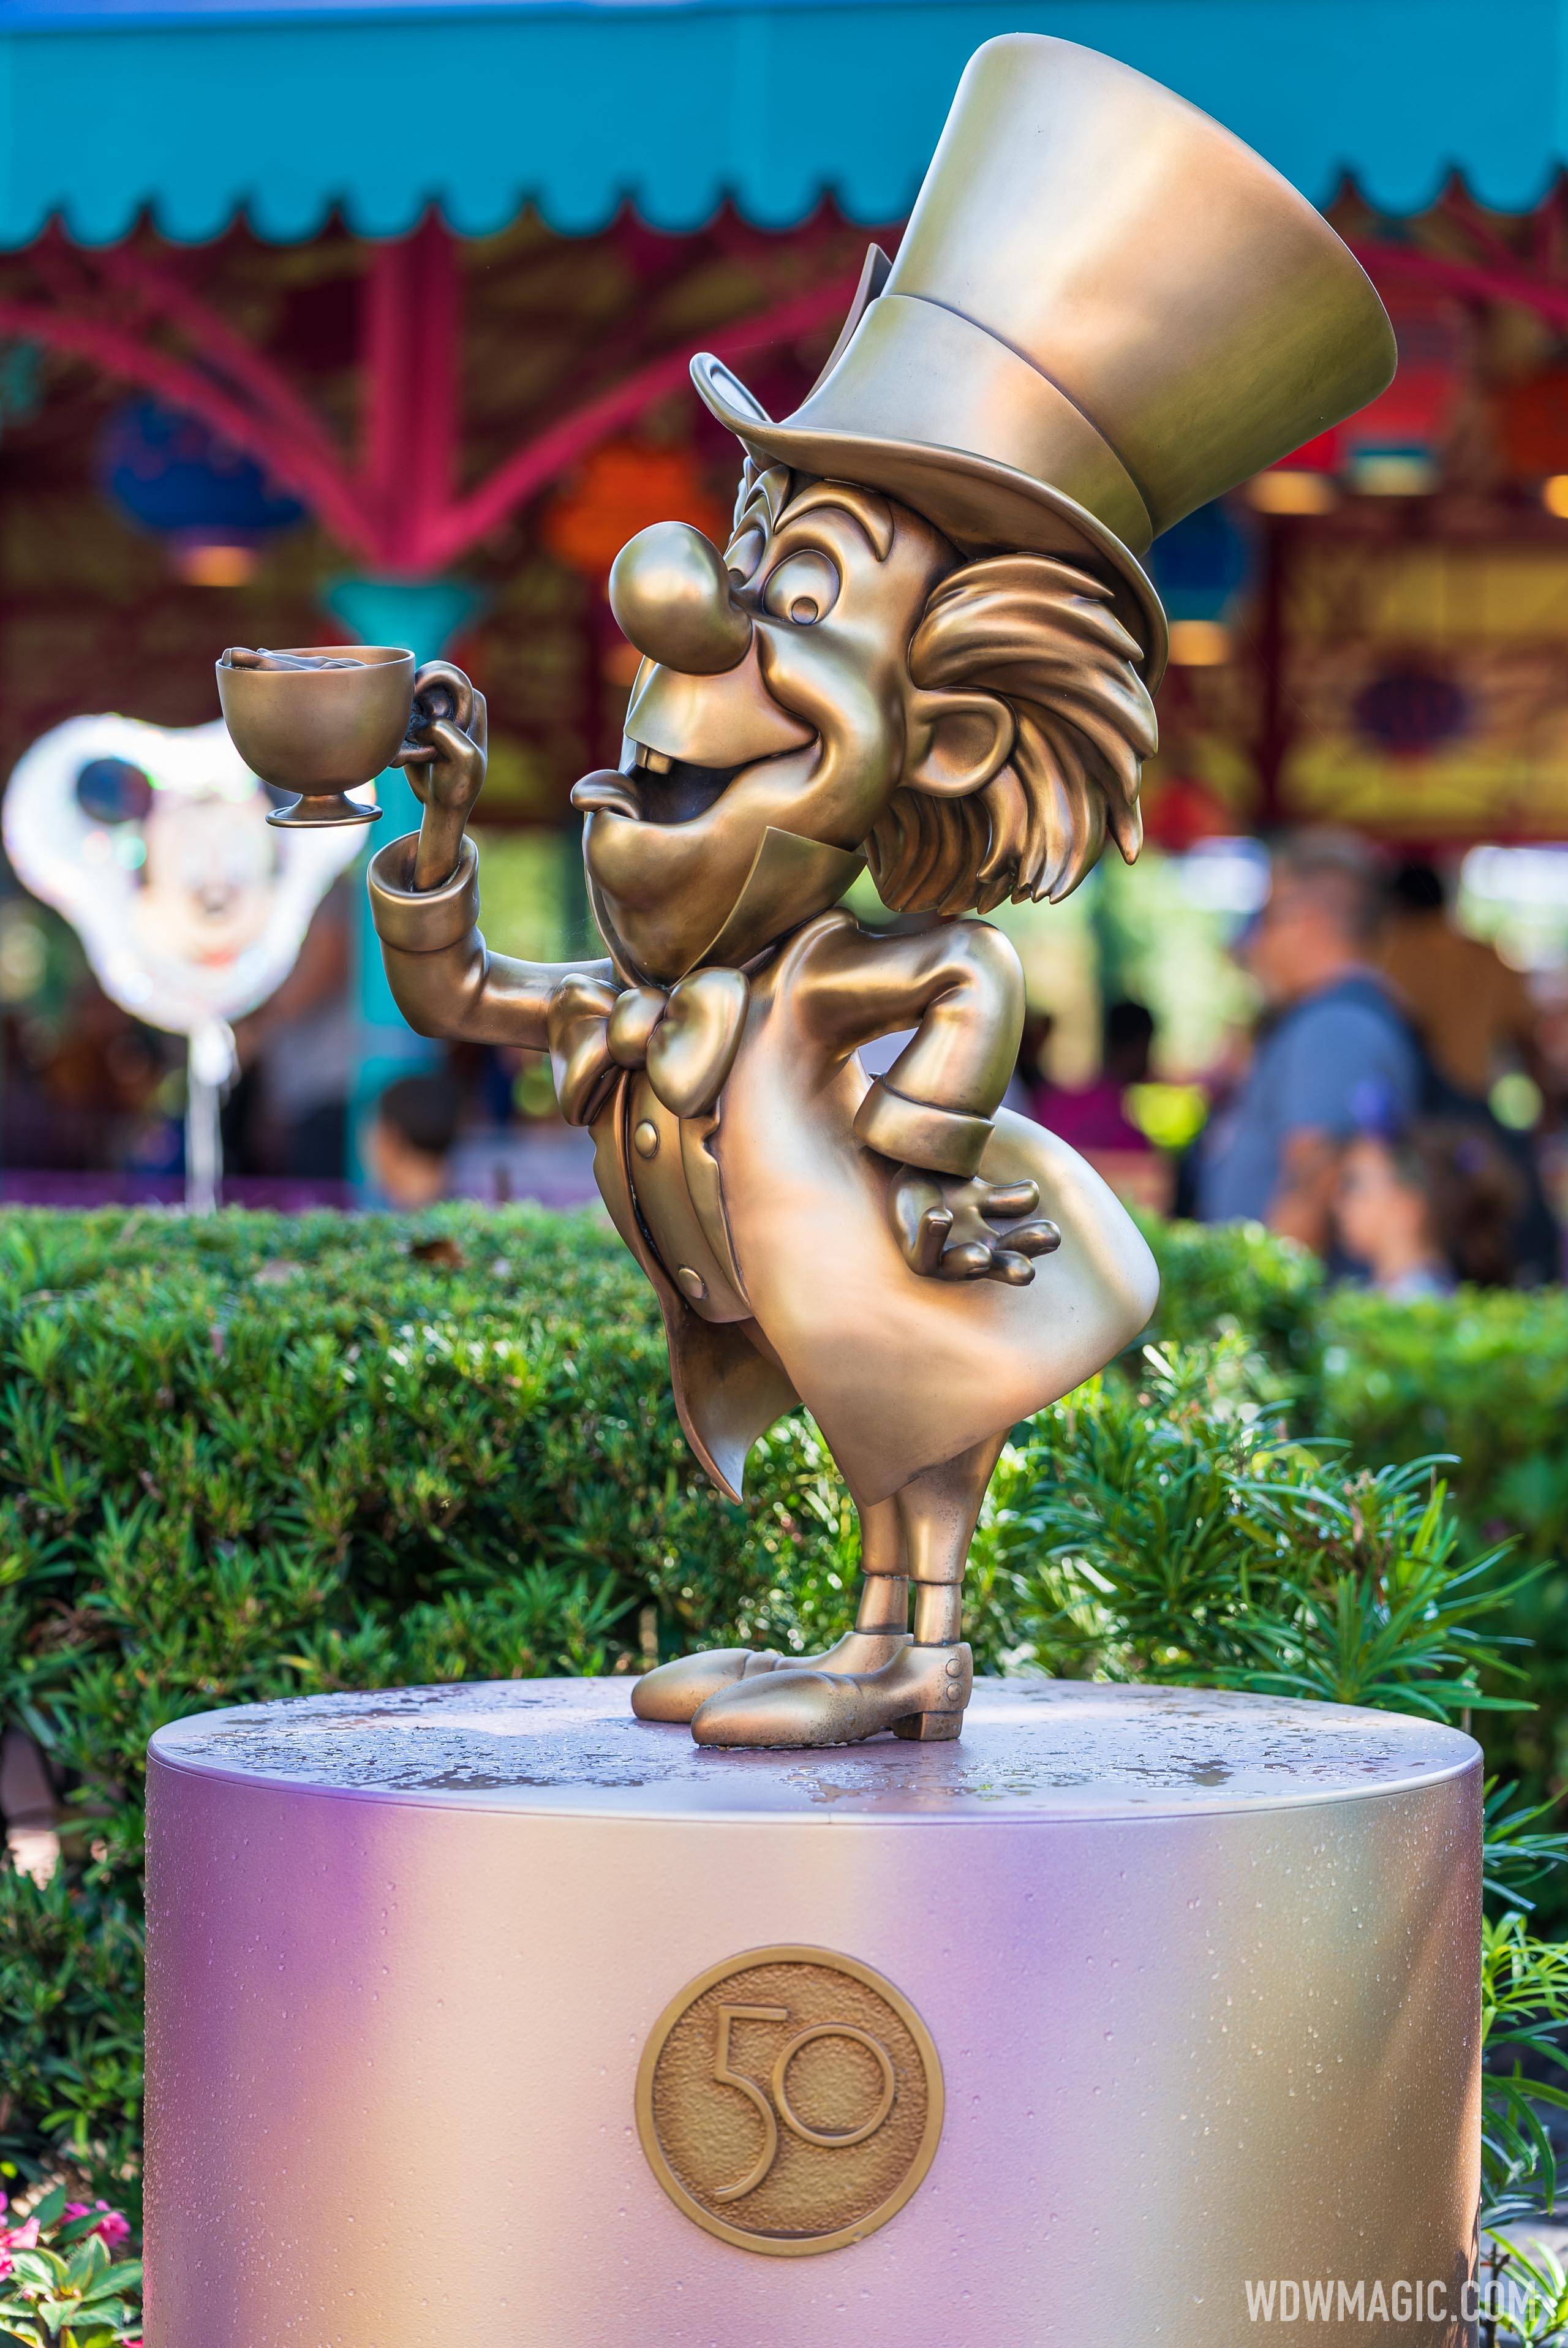 Mad Hatter - Fab 50 Character Statue